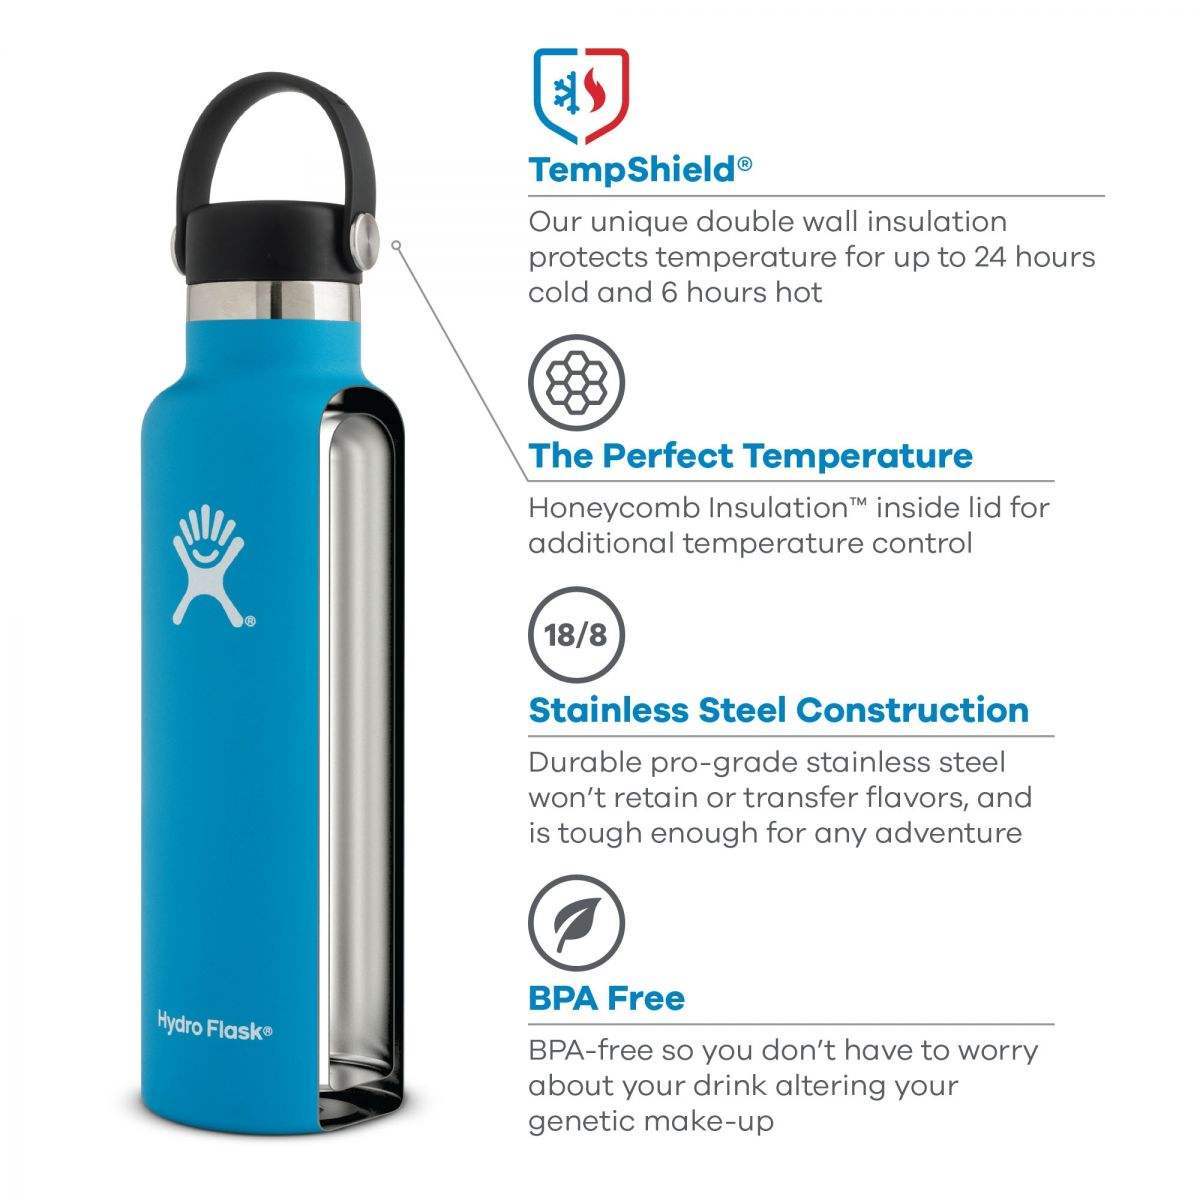 Hydro Flask 18oz Standard Mouth - The Luxury Promotional Gifts Company Limited